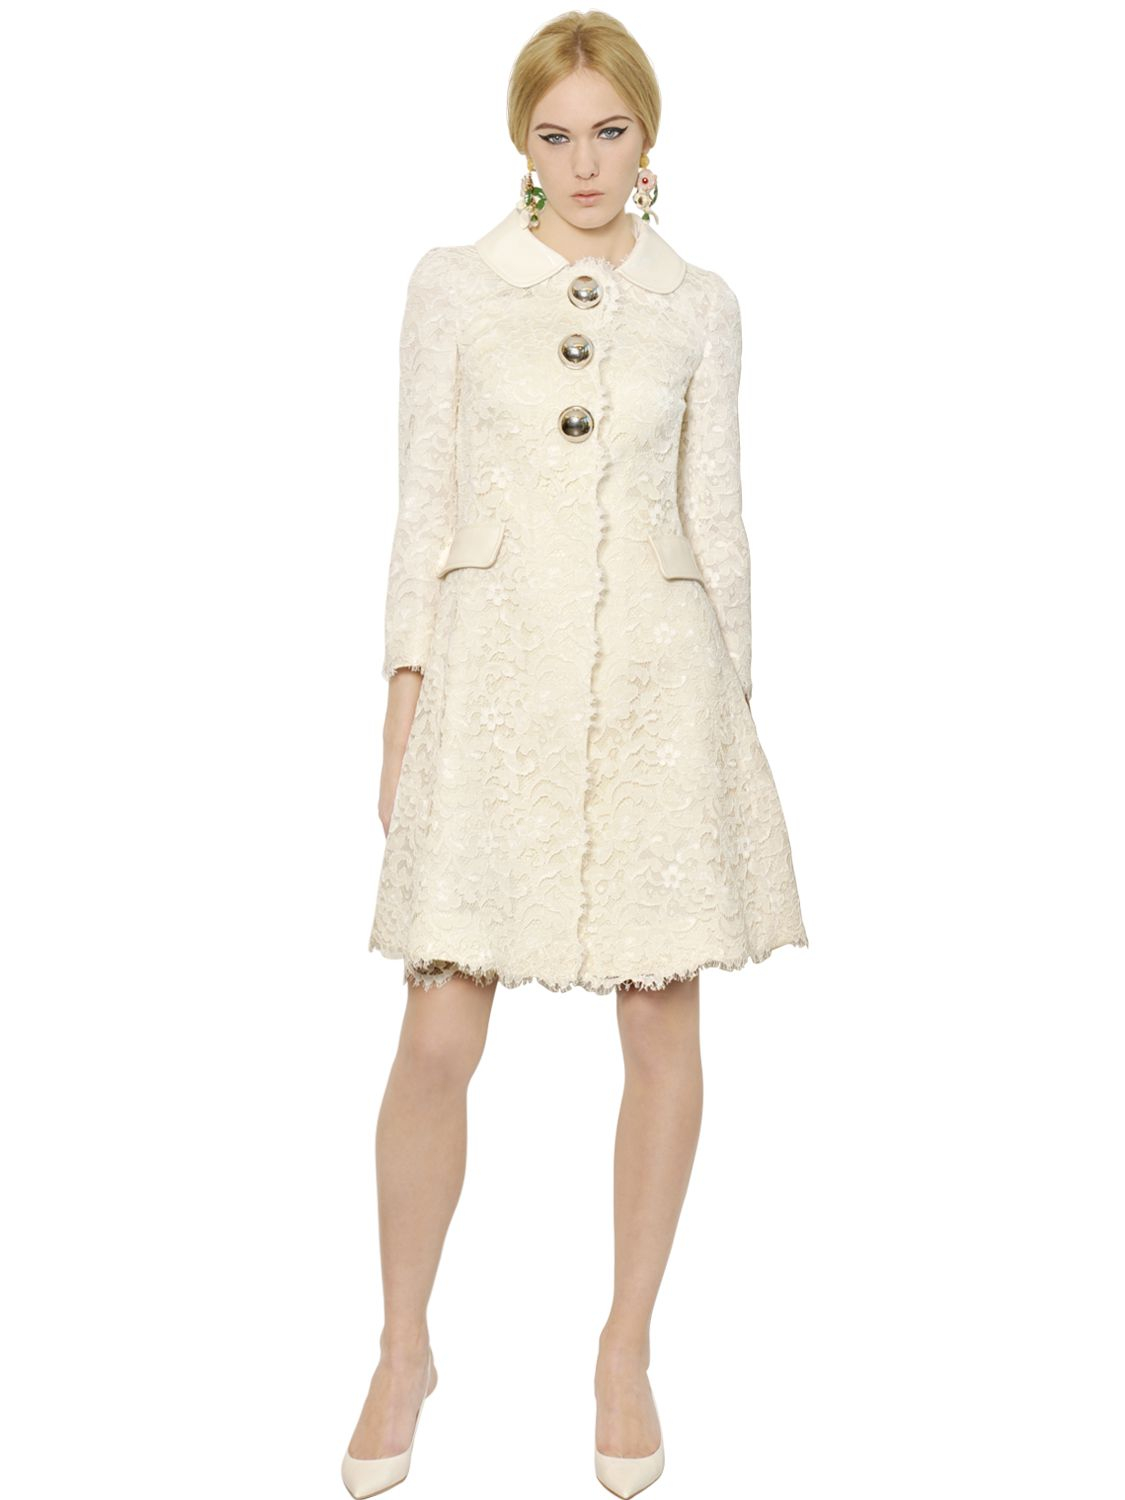 Dolce & gabbana Cotton Lace Coat in White | Lyst